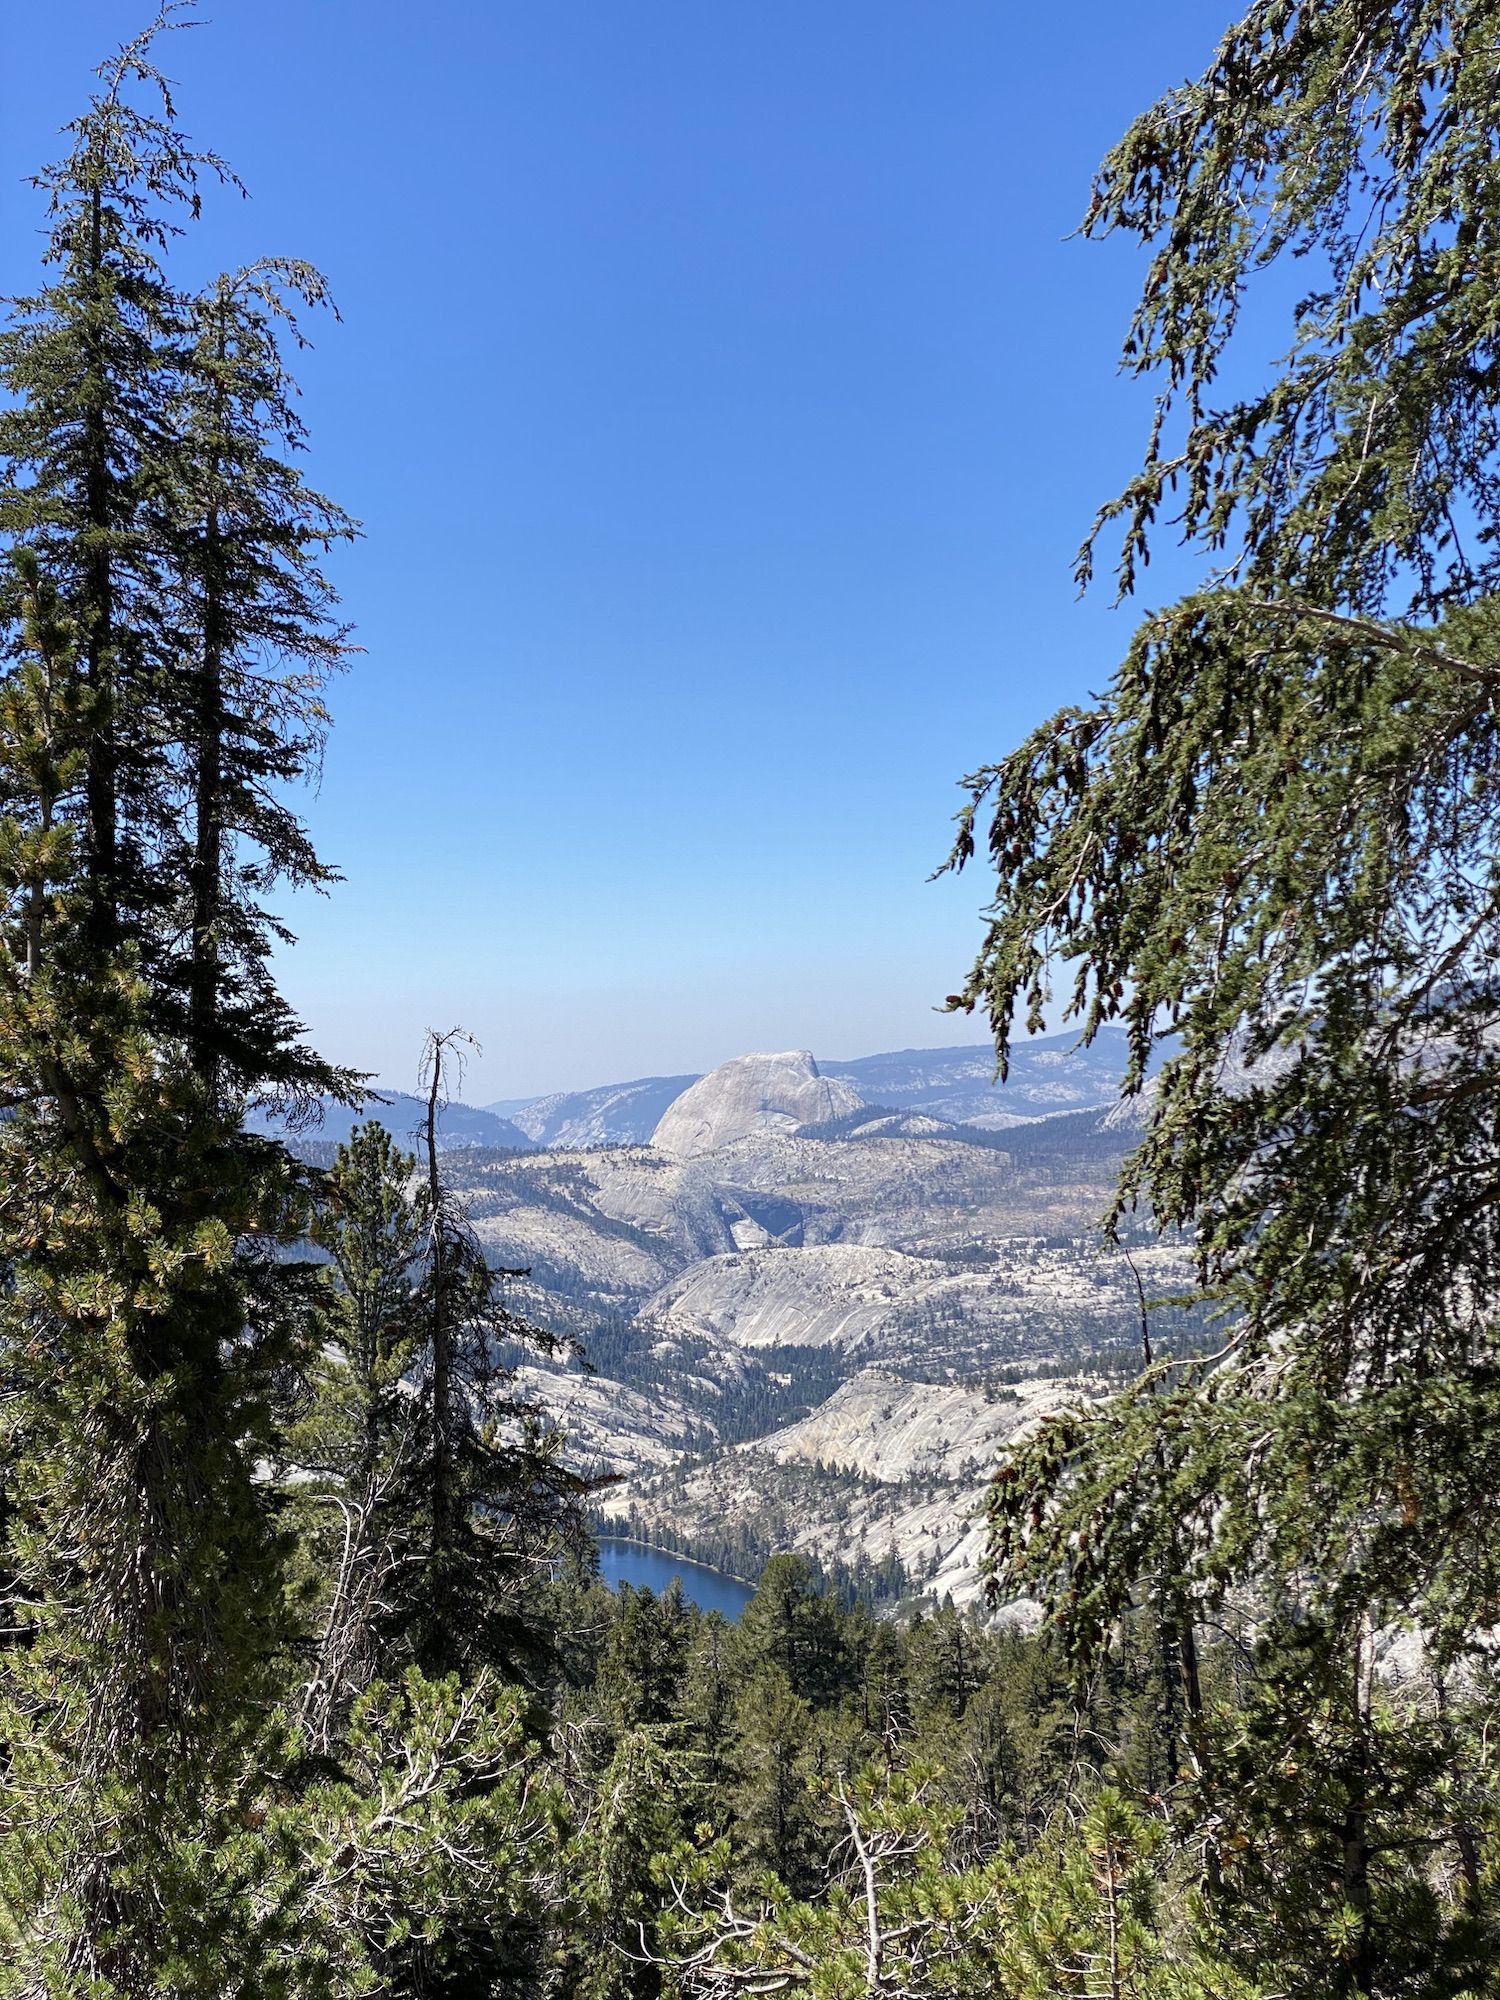 A river valley snaking through granite mountains, with Half Dome in the distance.